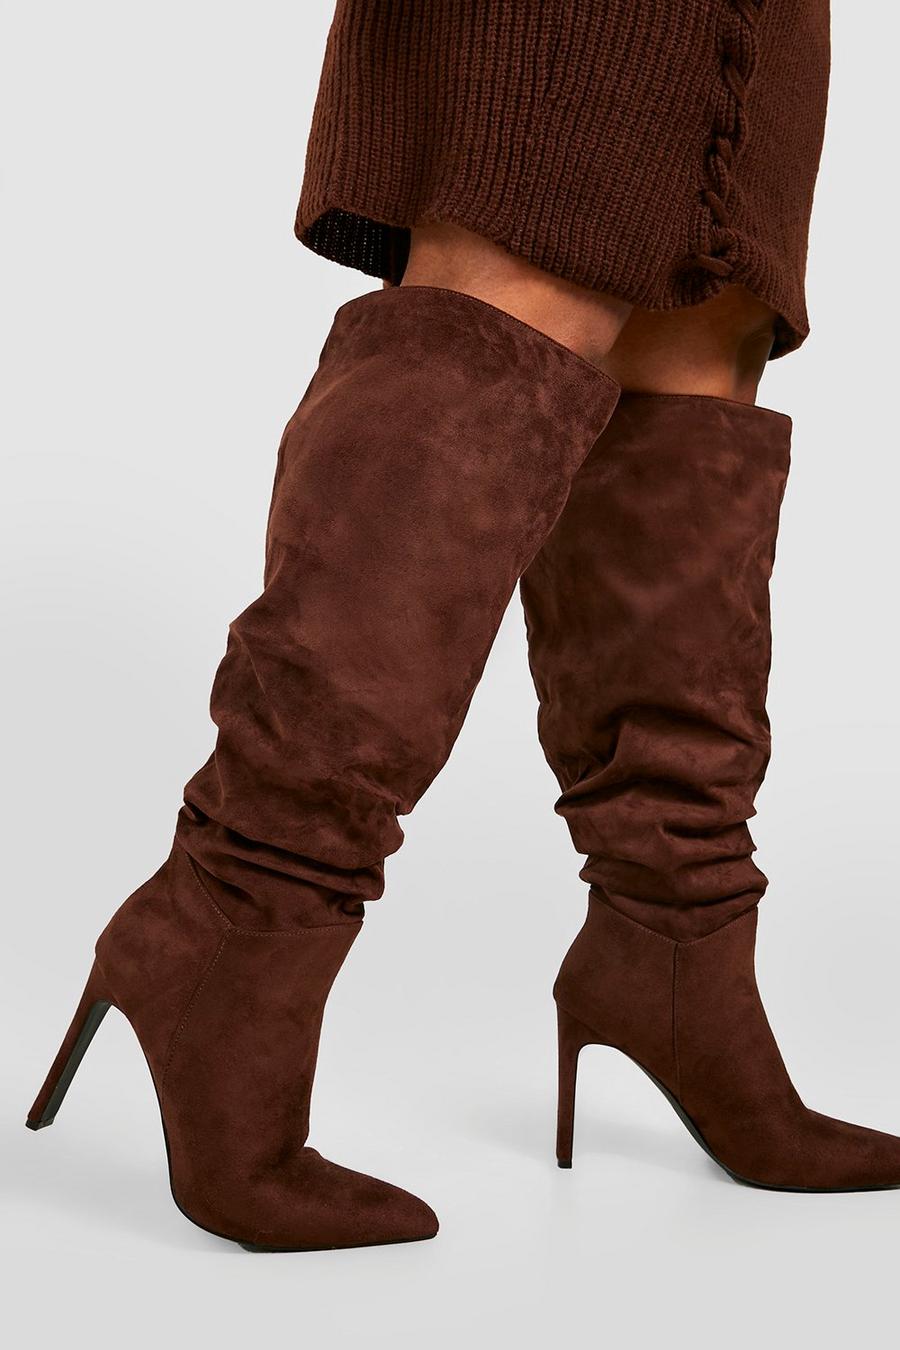 Chocolate marron Wide Calf Ruched Detail Knee High Boots